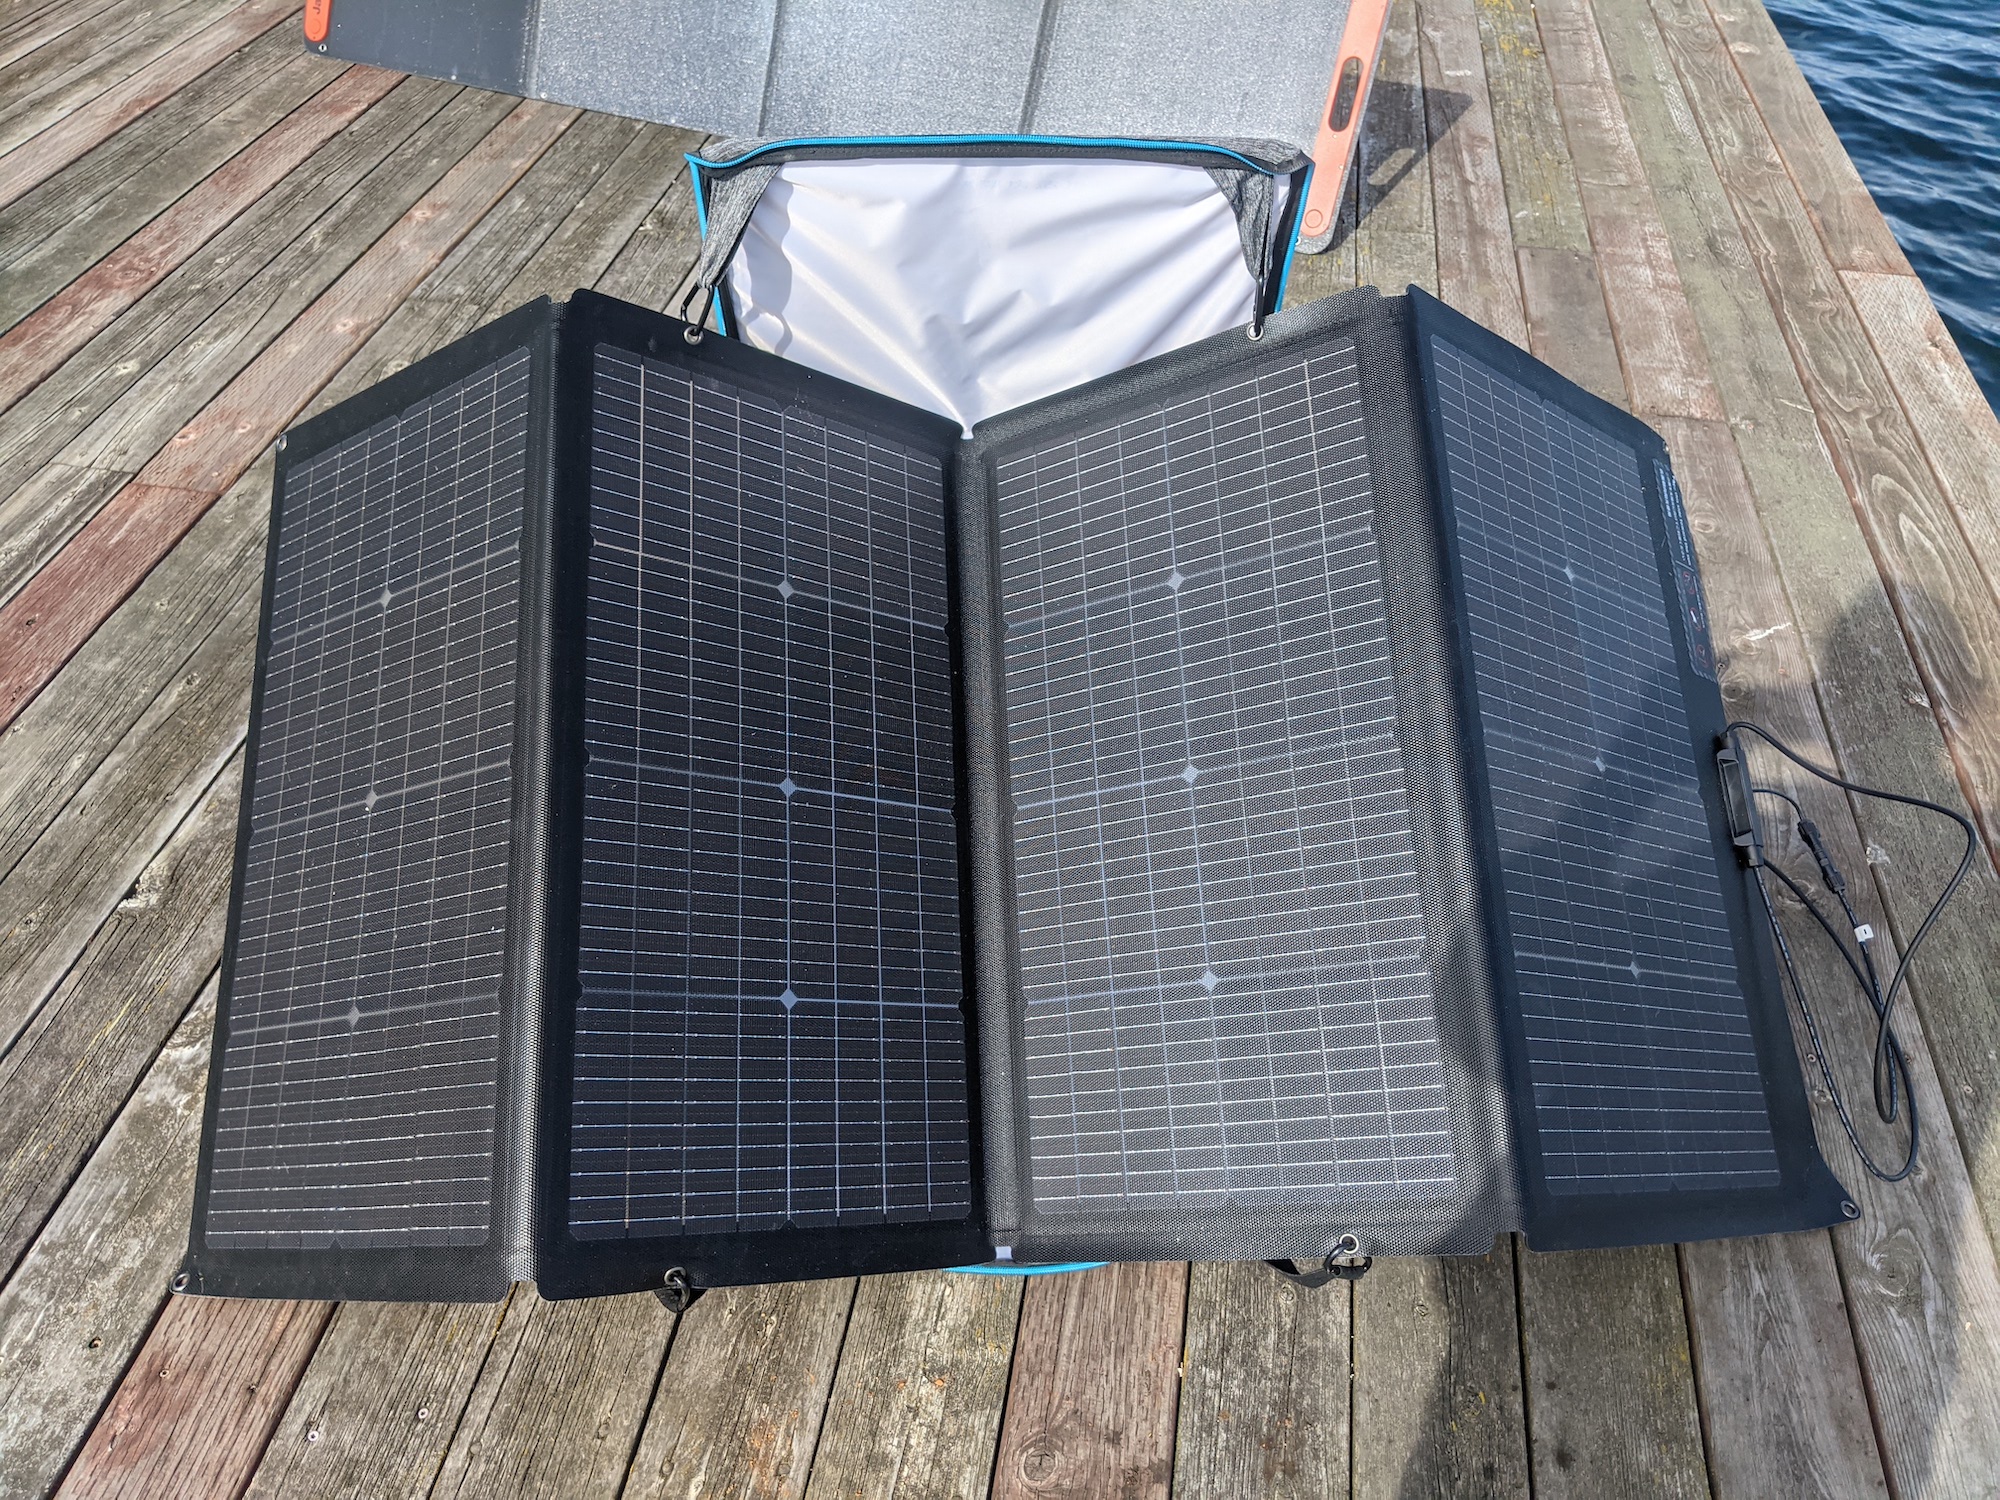 EcoFlow Solar Panel is bent after several months of storage.